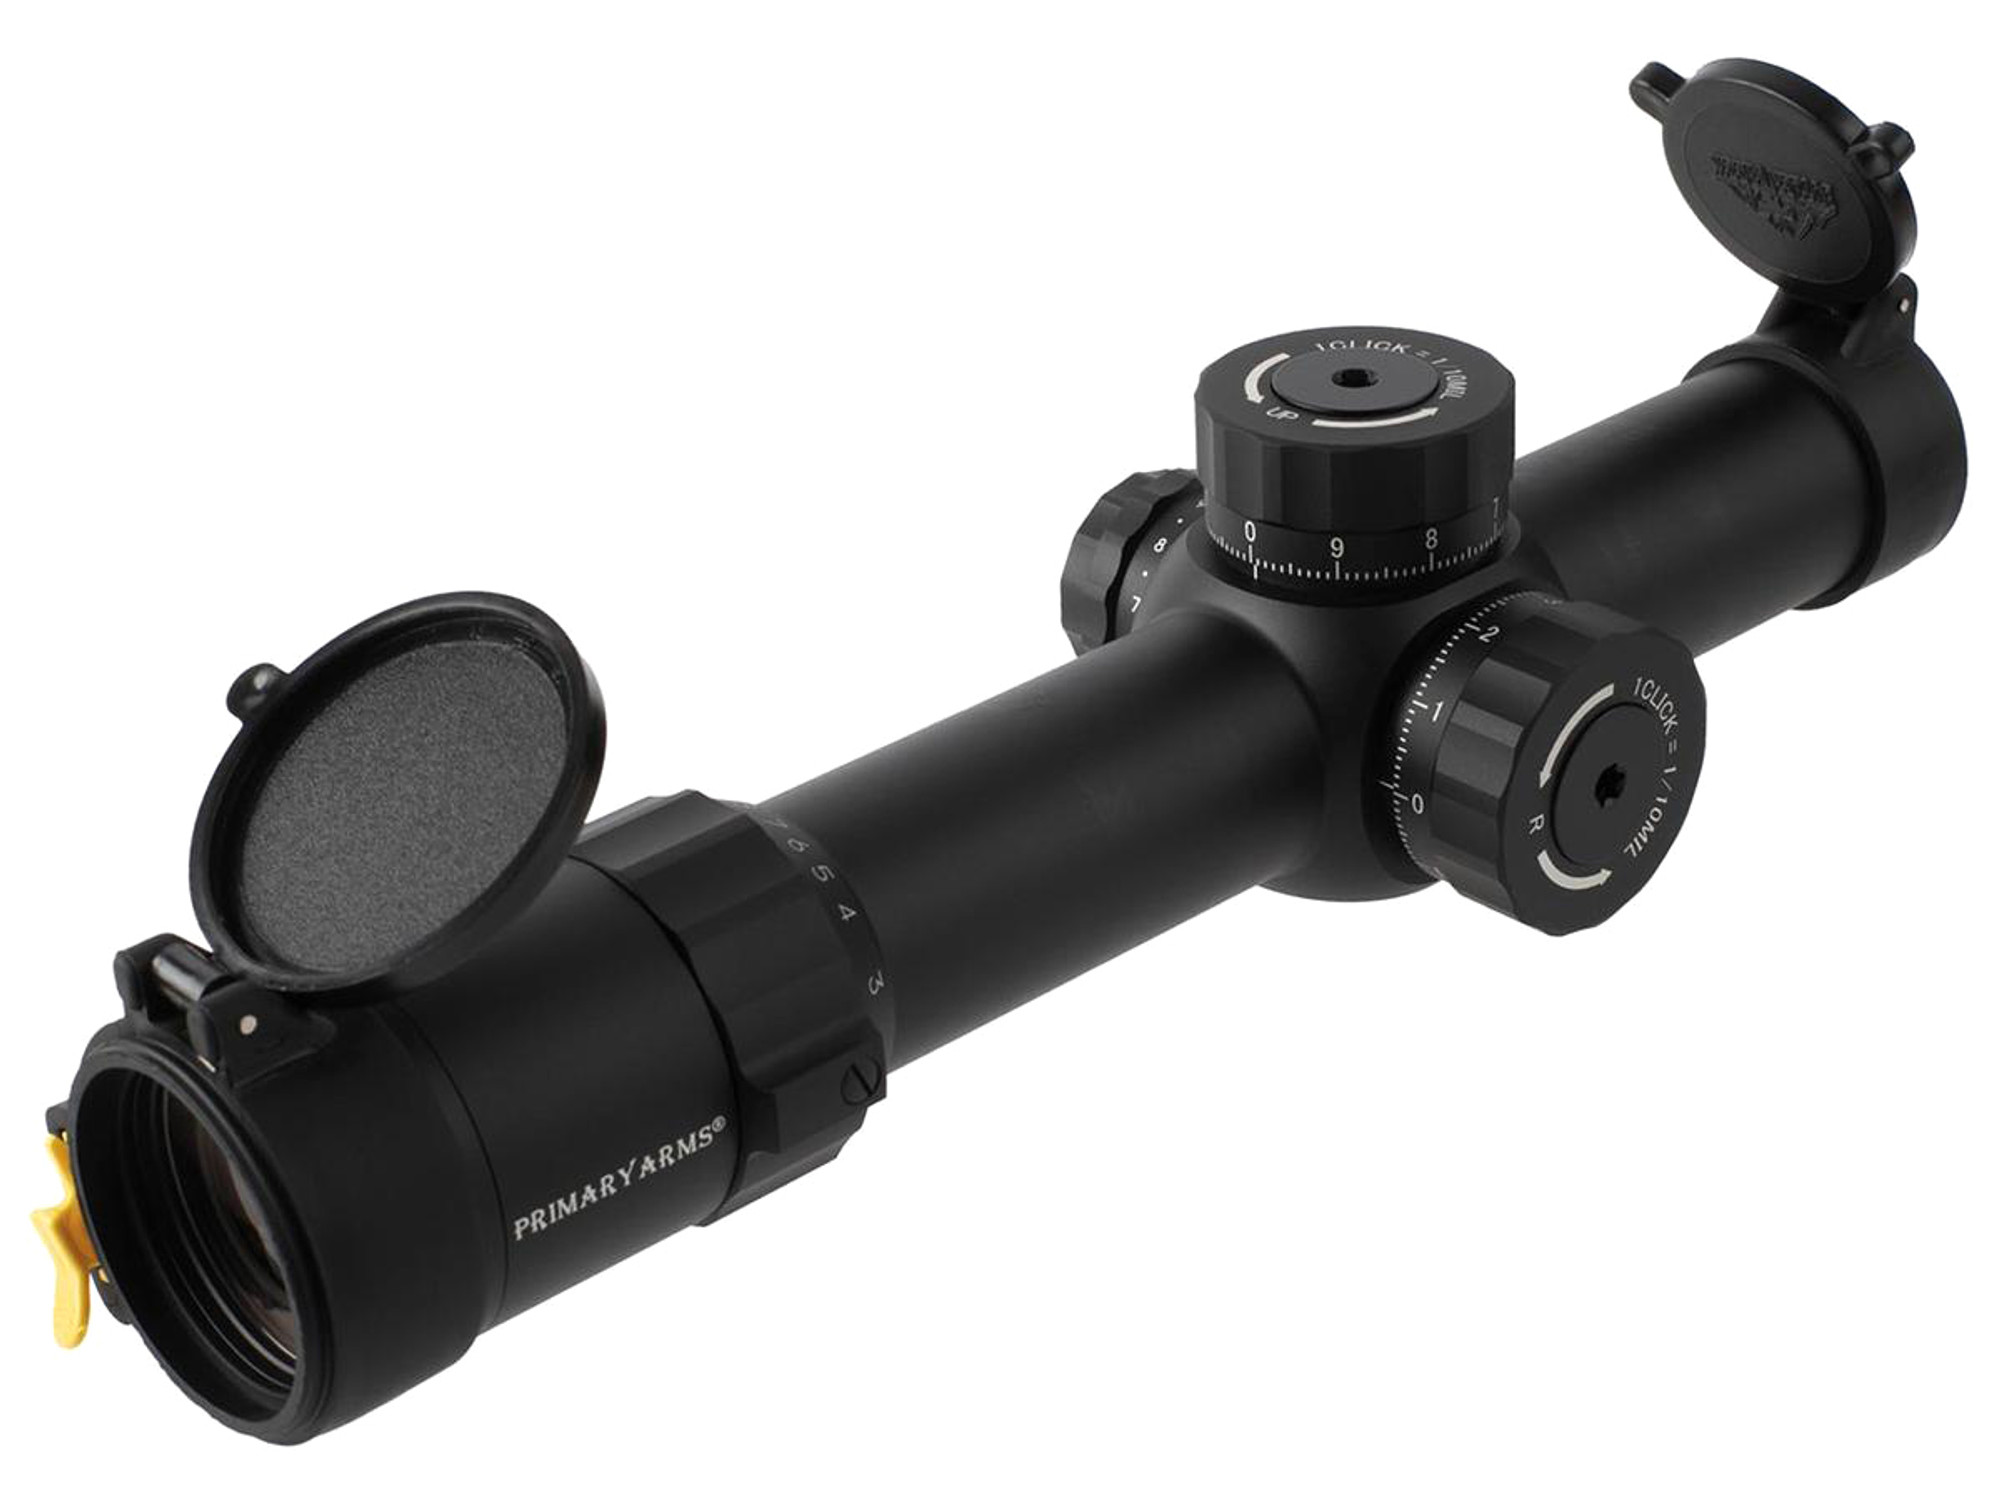 Primary Arms PLx 1-8x24mm FFP Rifle Scope w/ Illuminated ACSS (Model: Griffin MIL)